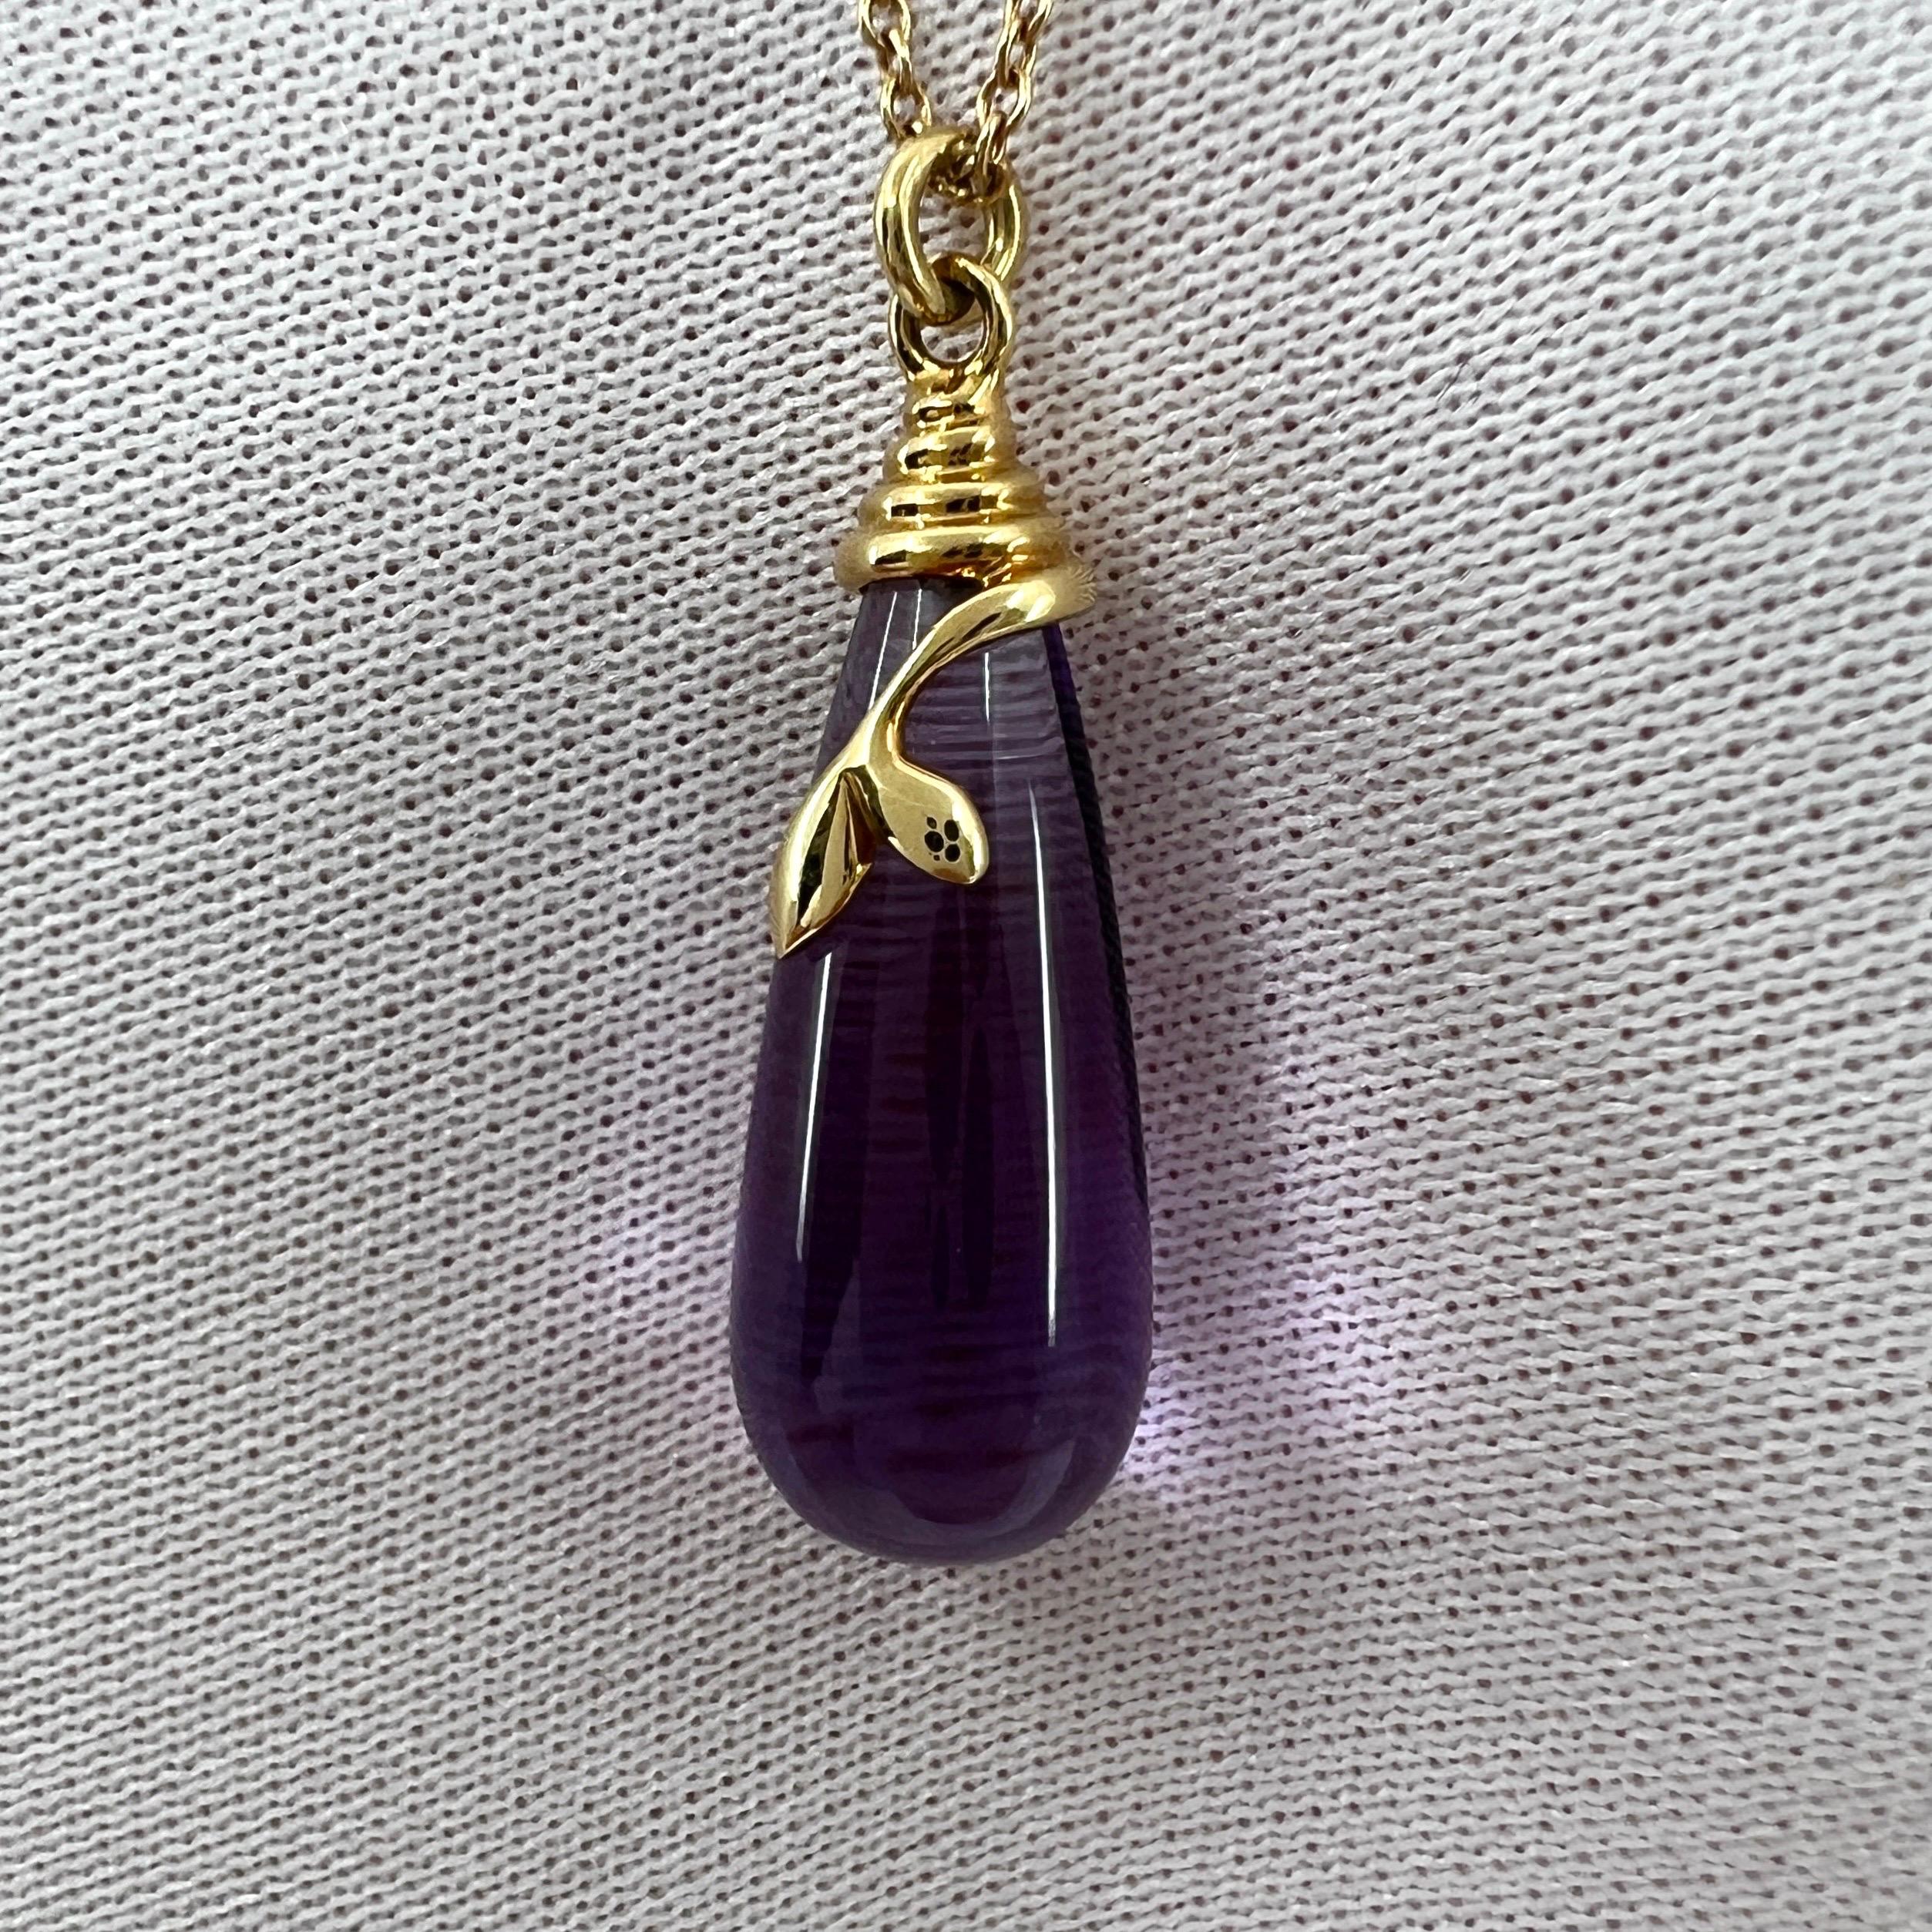 Rare Tiffany & Co. Paloma Picasso Olive Leaf Amethyst Gold Drop Pendant Necklace For Sale 3